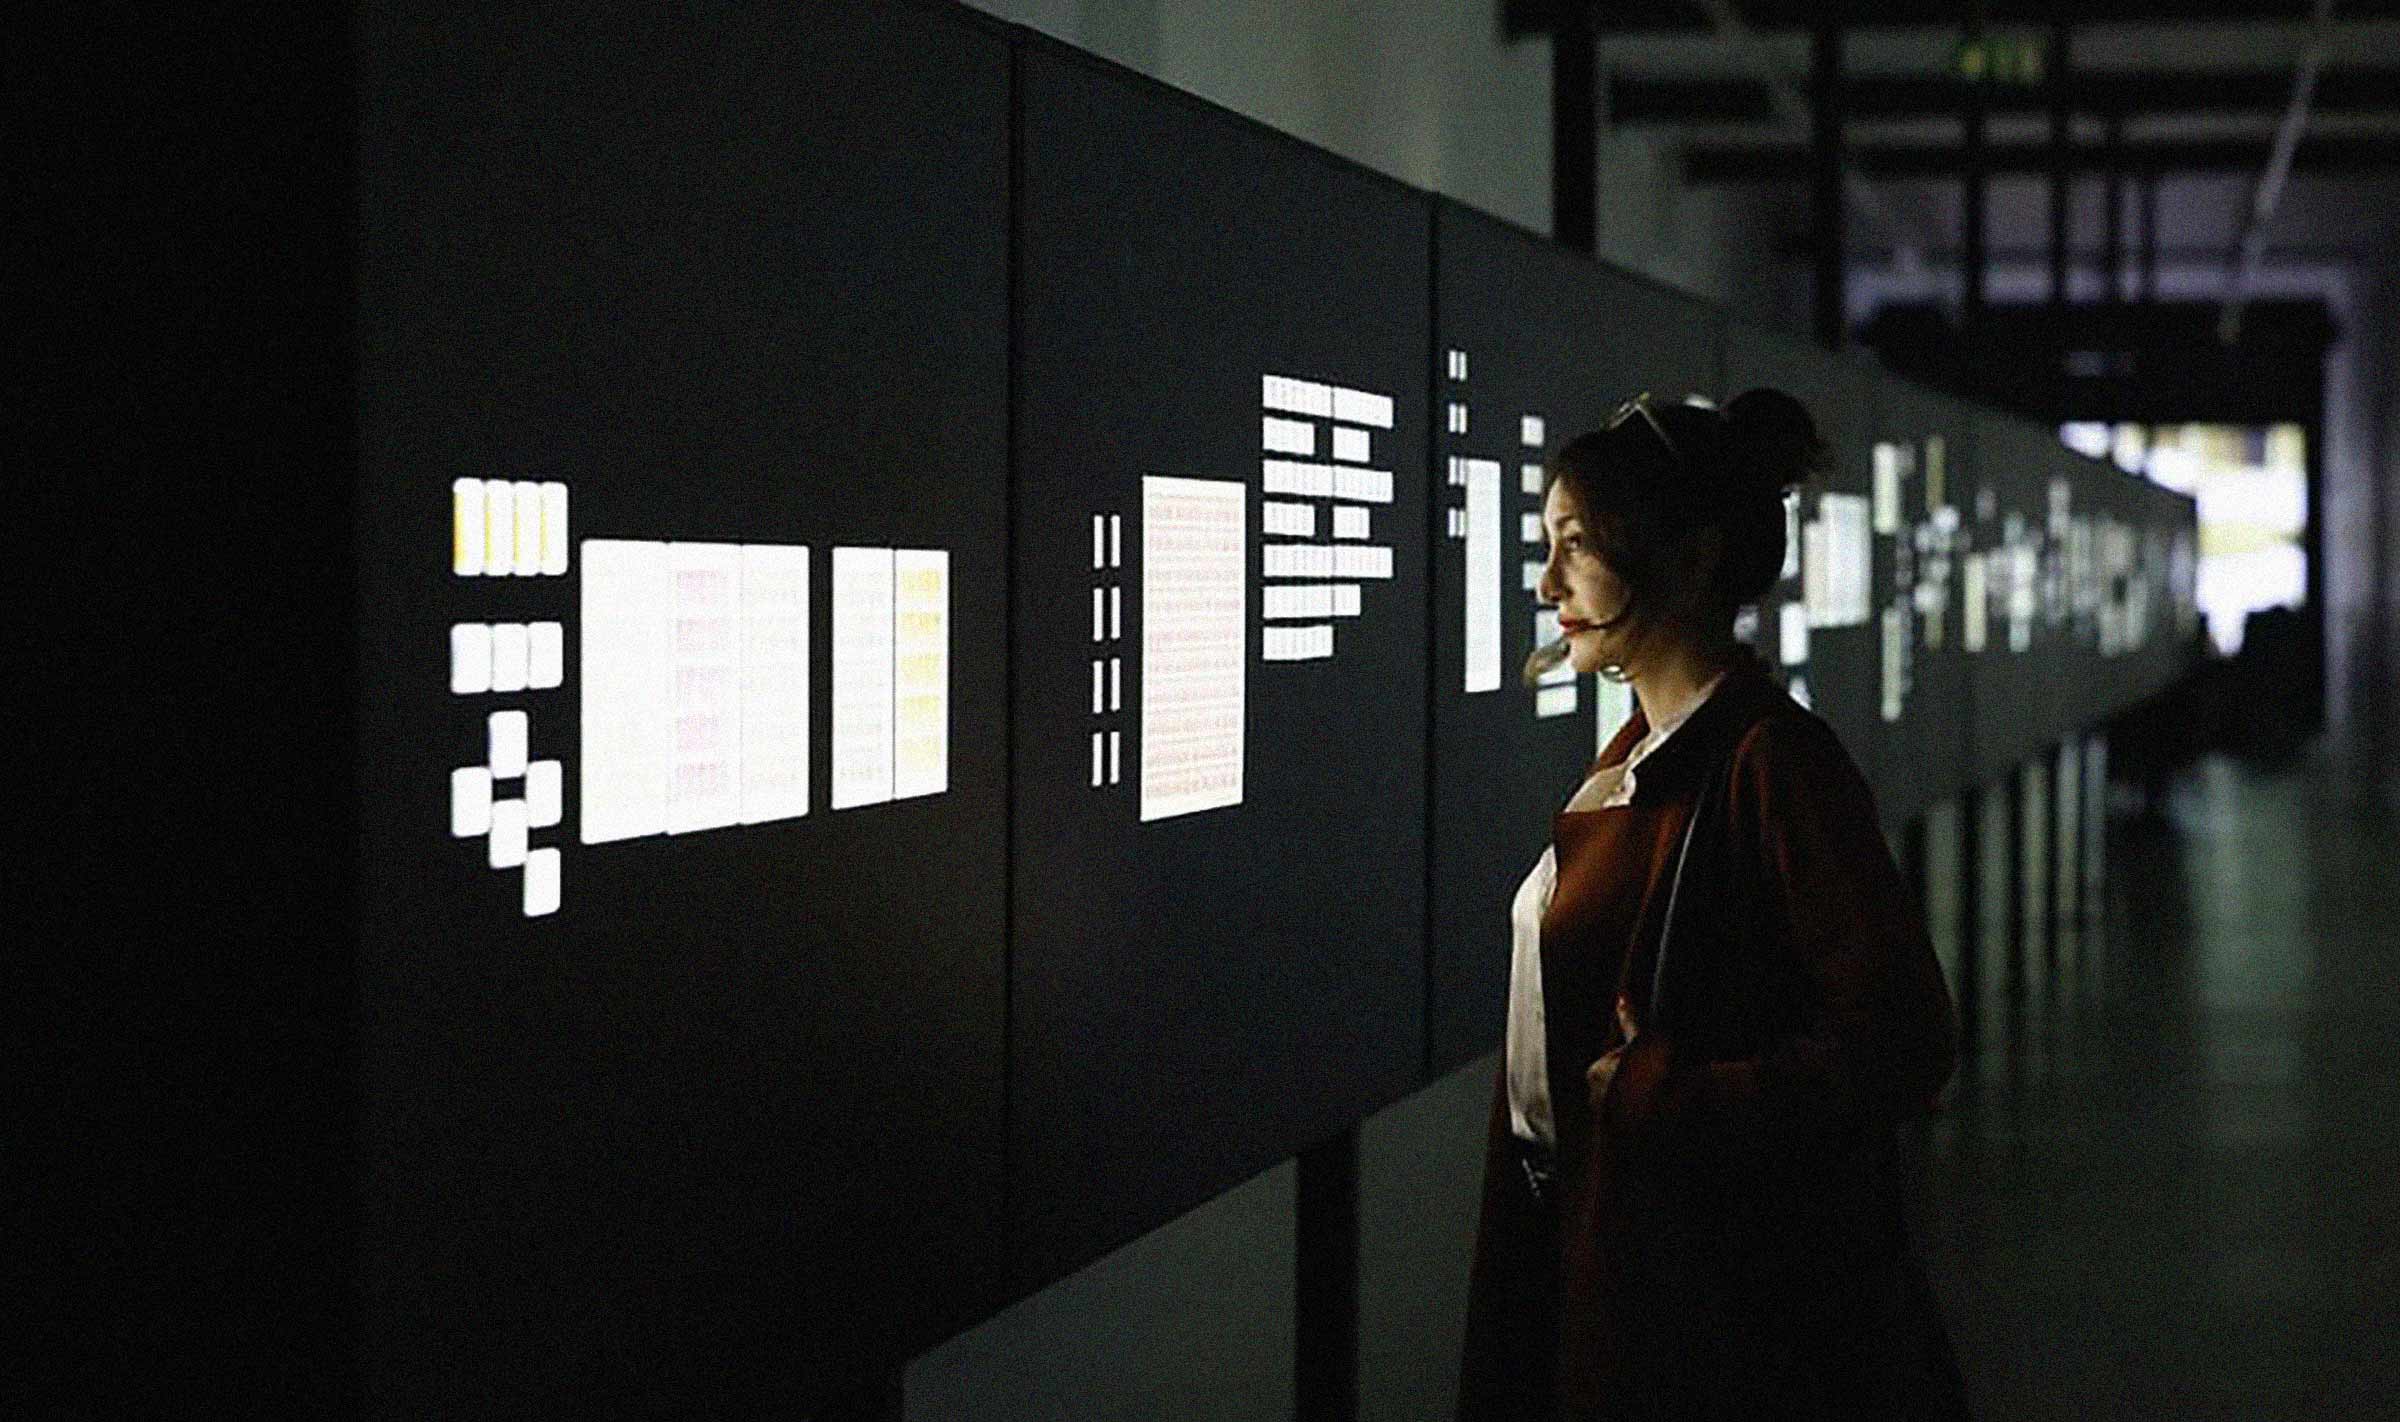 Interior installation photograph inside a long dark corridor, with display panels showing illuminated stamps. A woman stands is looking at the display.